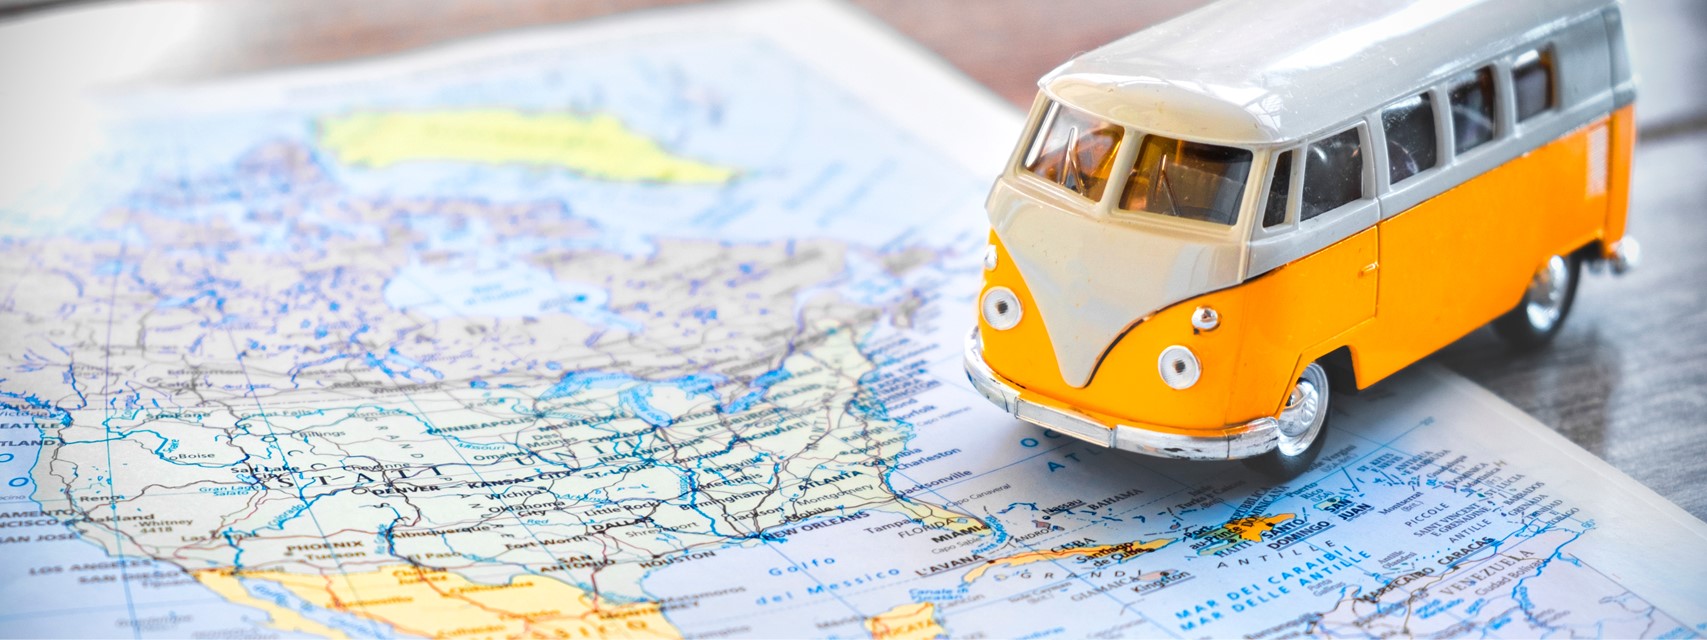 toy VW van next to map of the United States